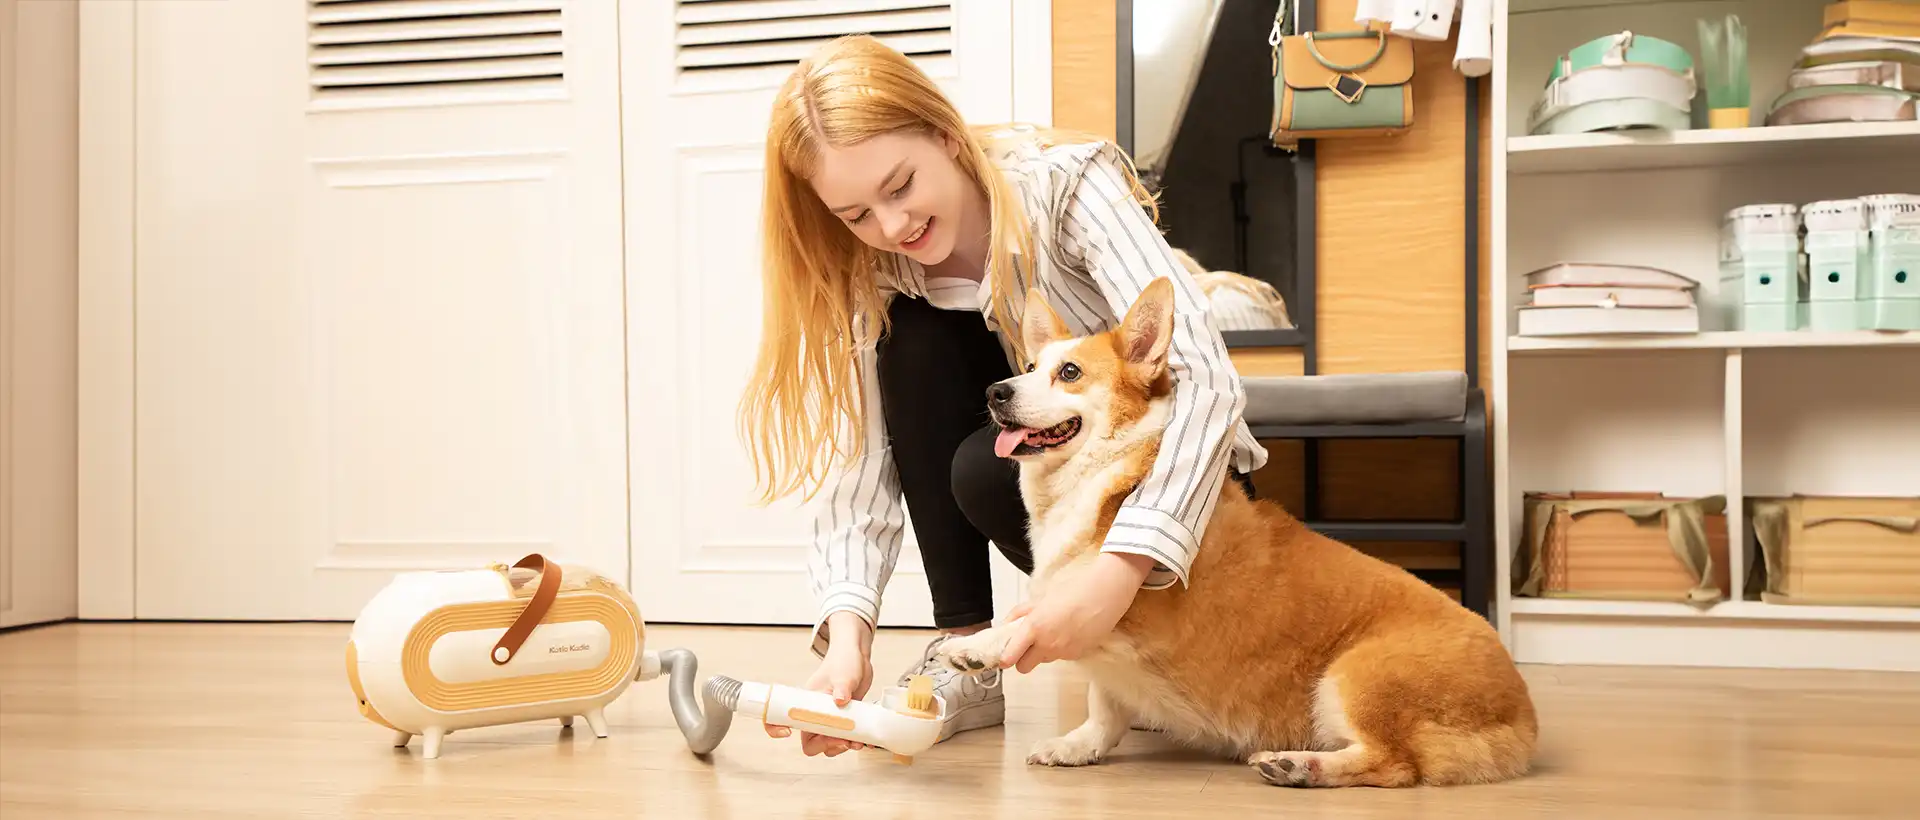 Exploring the Features and Functions of Pet GPS Trackers